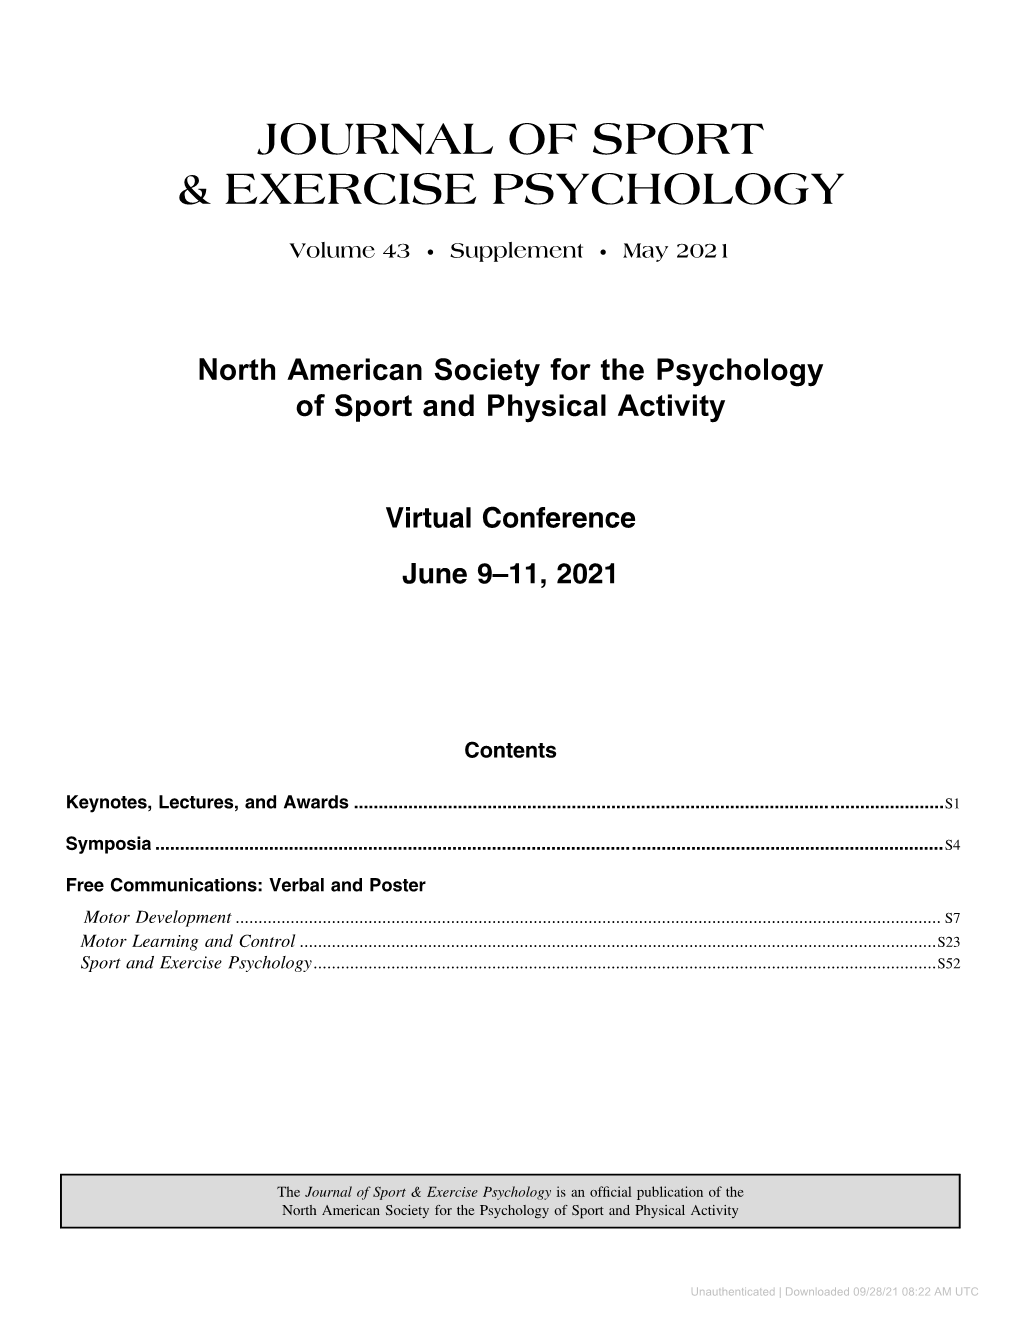 Journal of Sport & Exercise Psychology